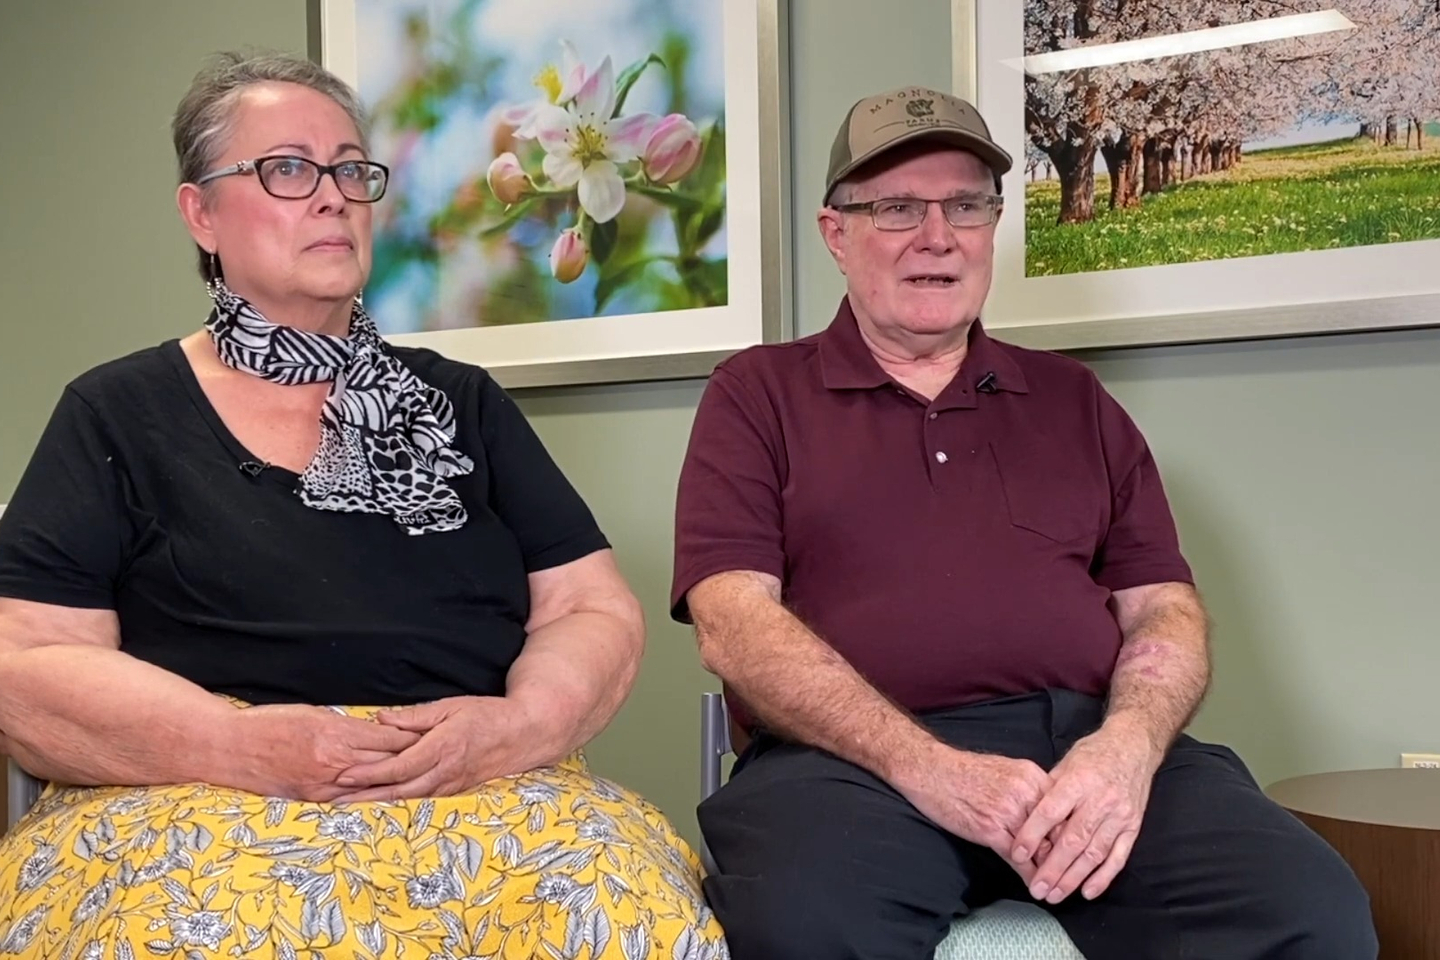 Grace and Dean Hill sit together in front of two large photos of flowering trees, discussing the care their received during their time at Reston Hospital Center.